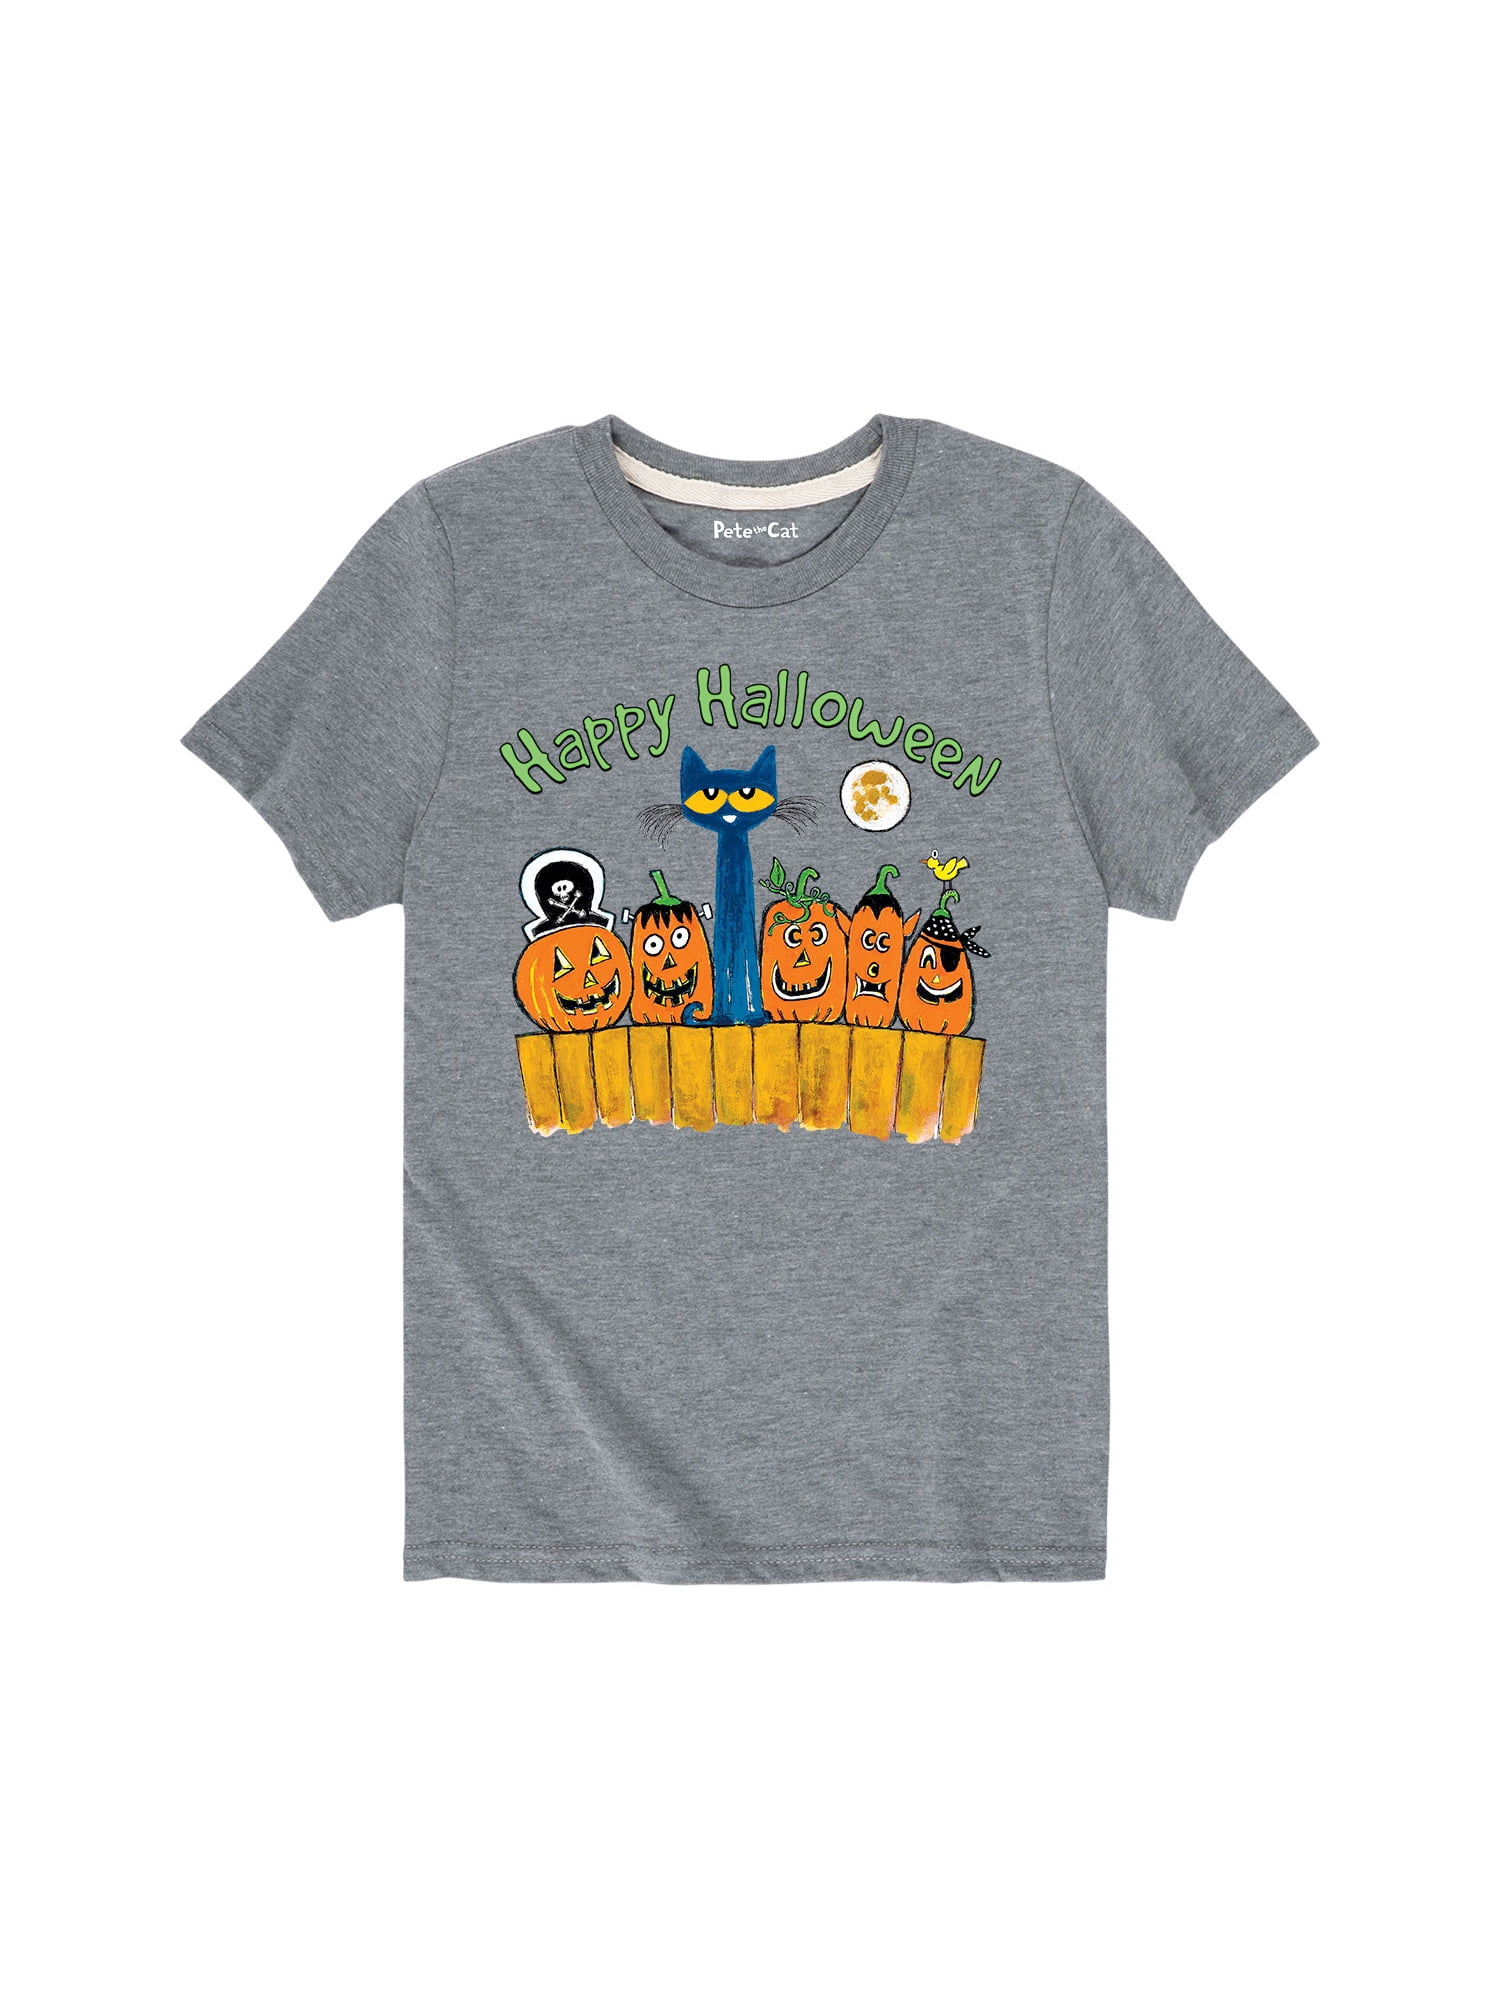 Masters of Energy Happy Halloween t-shirt Clothing Unisex Kids Clothing Tops & Tees 